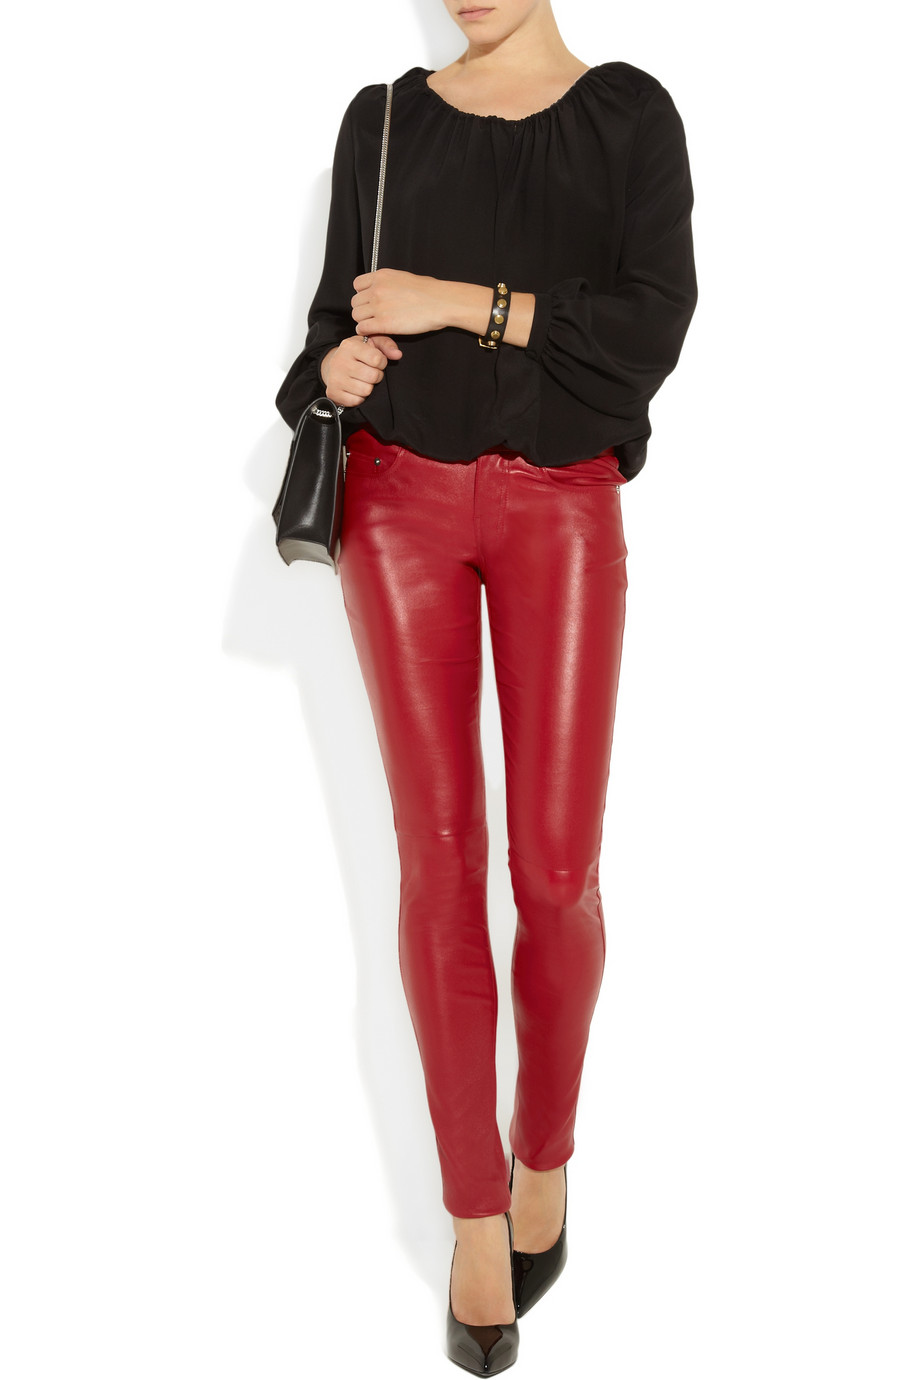 Lyst - Saint Laurent Skinny Stretch-leather Pants in Red